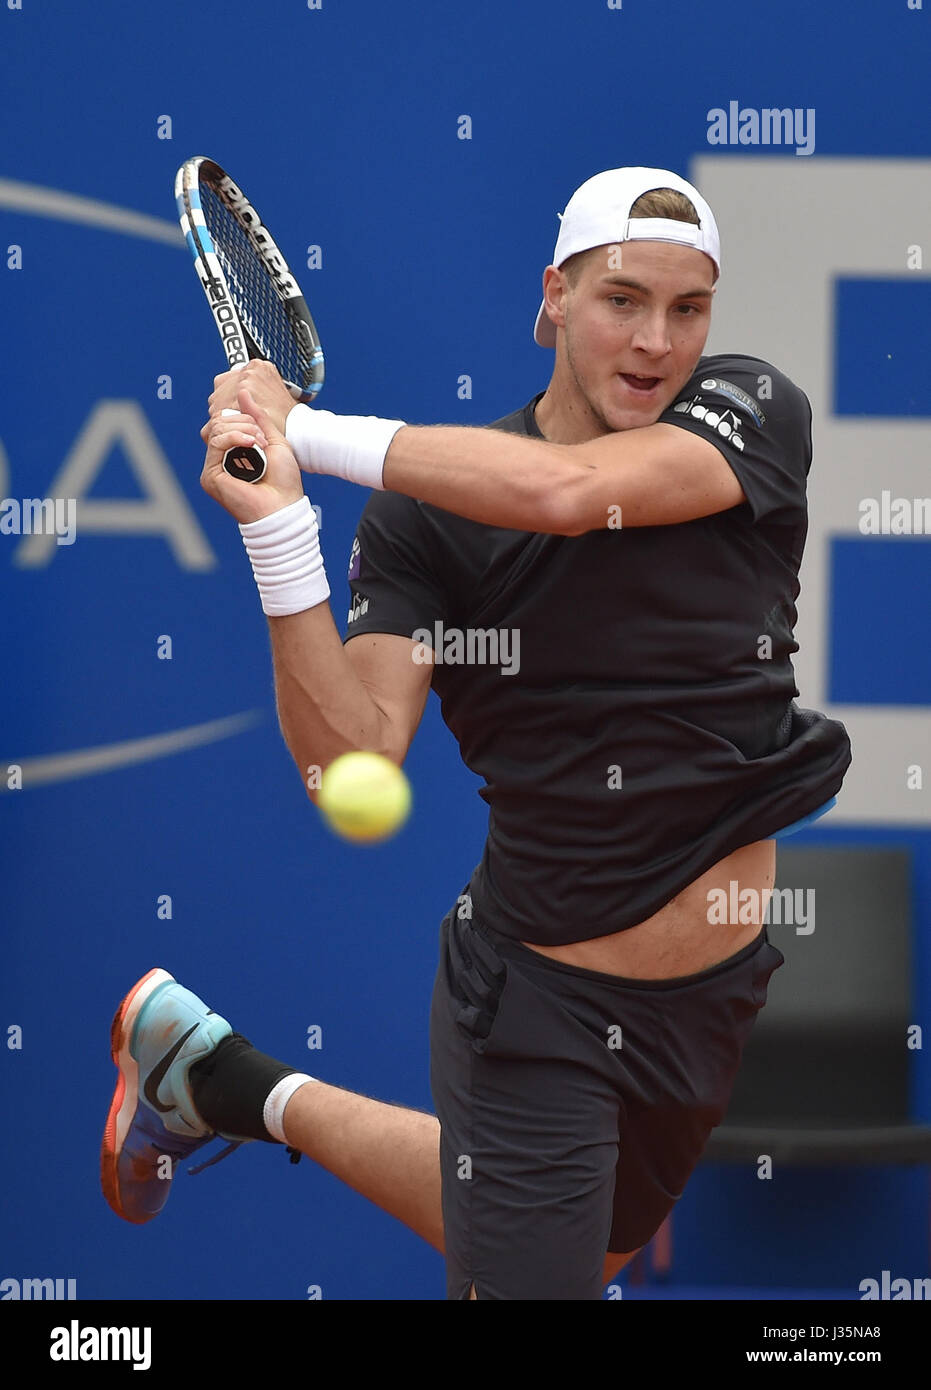 Munich, Germany. 03rd May, 2017. Jan-Lennard Struff from Germany plays  against his countryman, Haas, during their men's singles tennis match at  the ATP Tour in Munich, Germany, 03 May 2017. Photo: Angelika